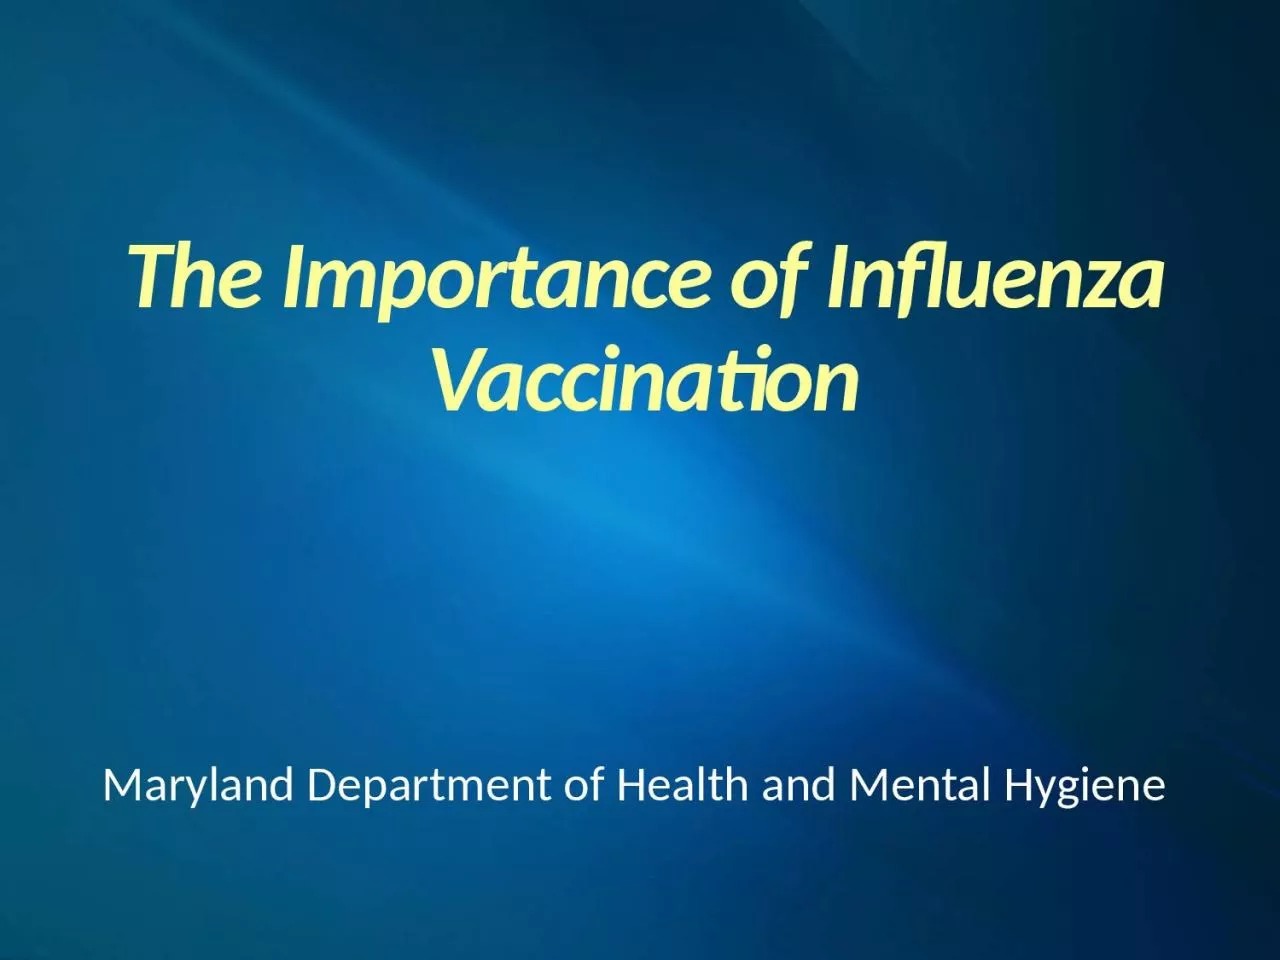 The Importance of Influenza Vaccination